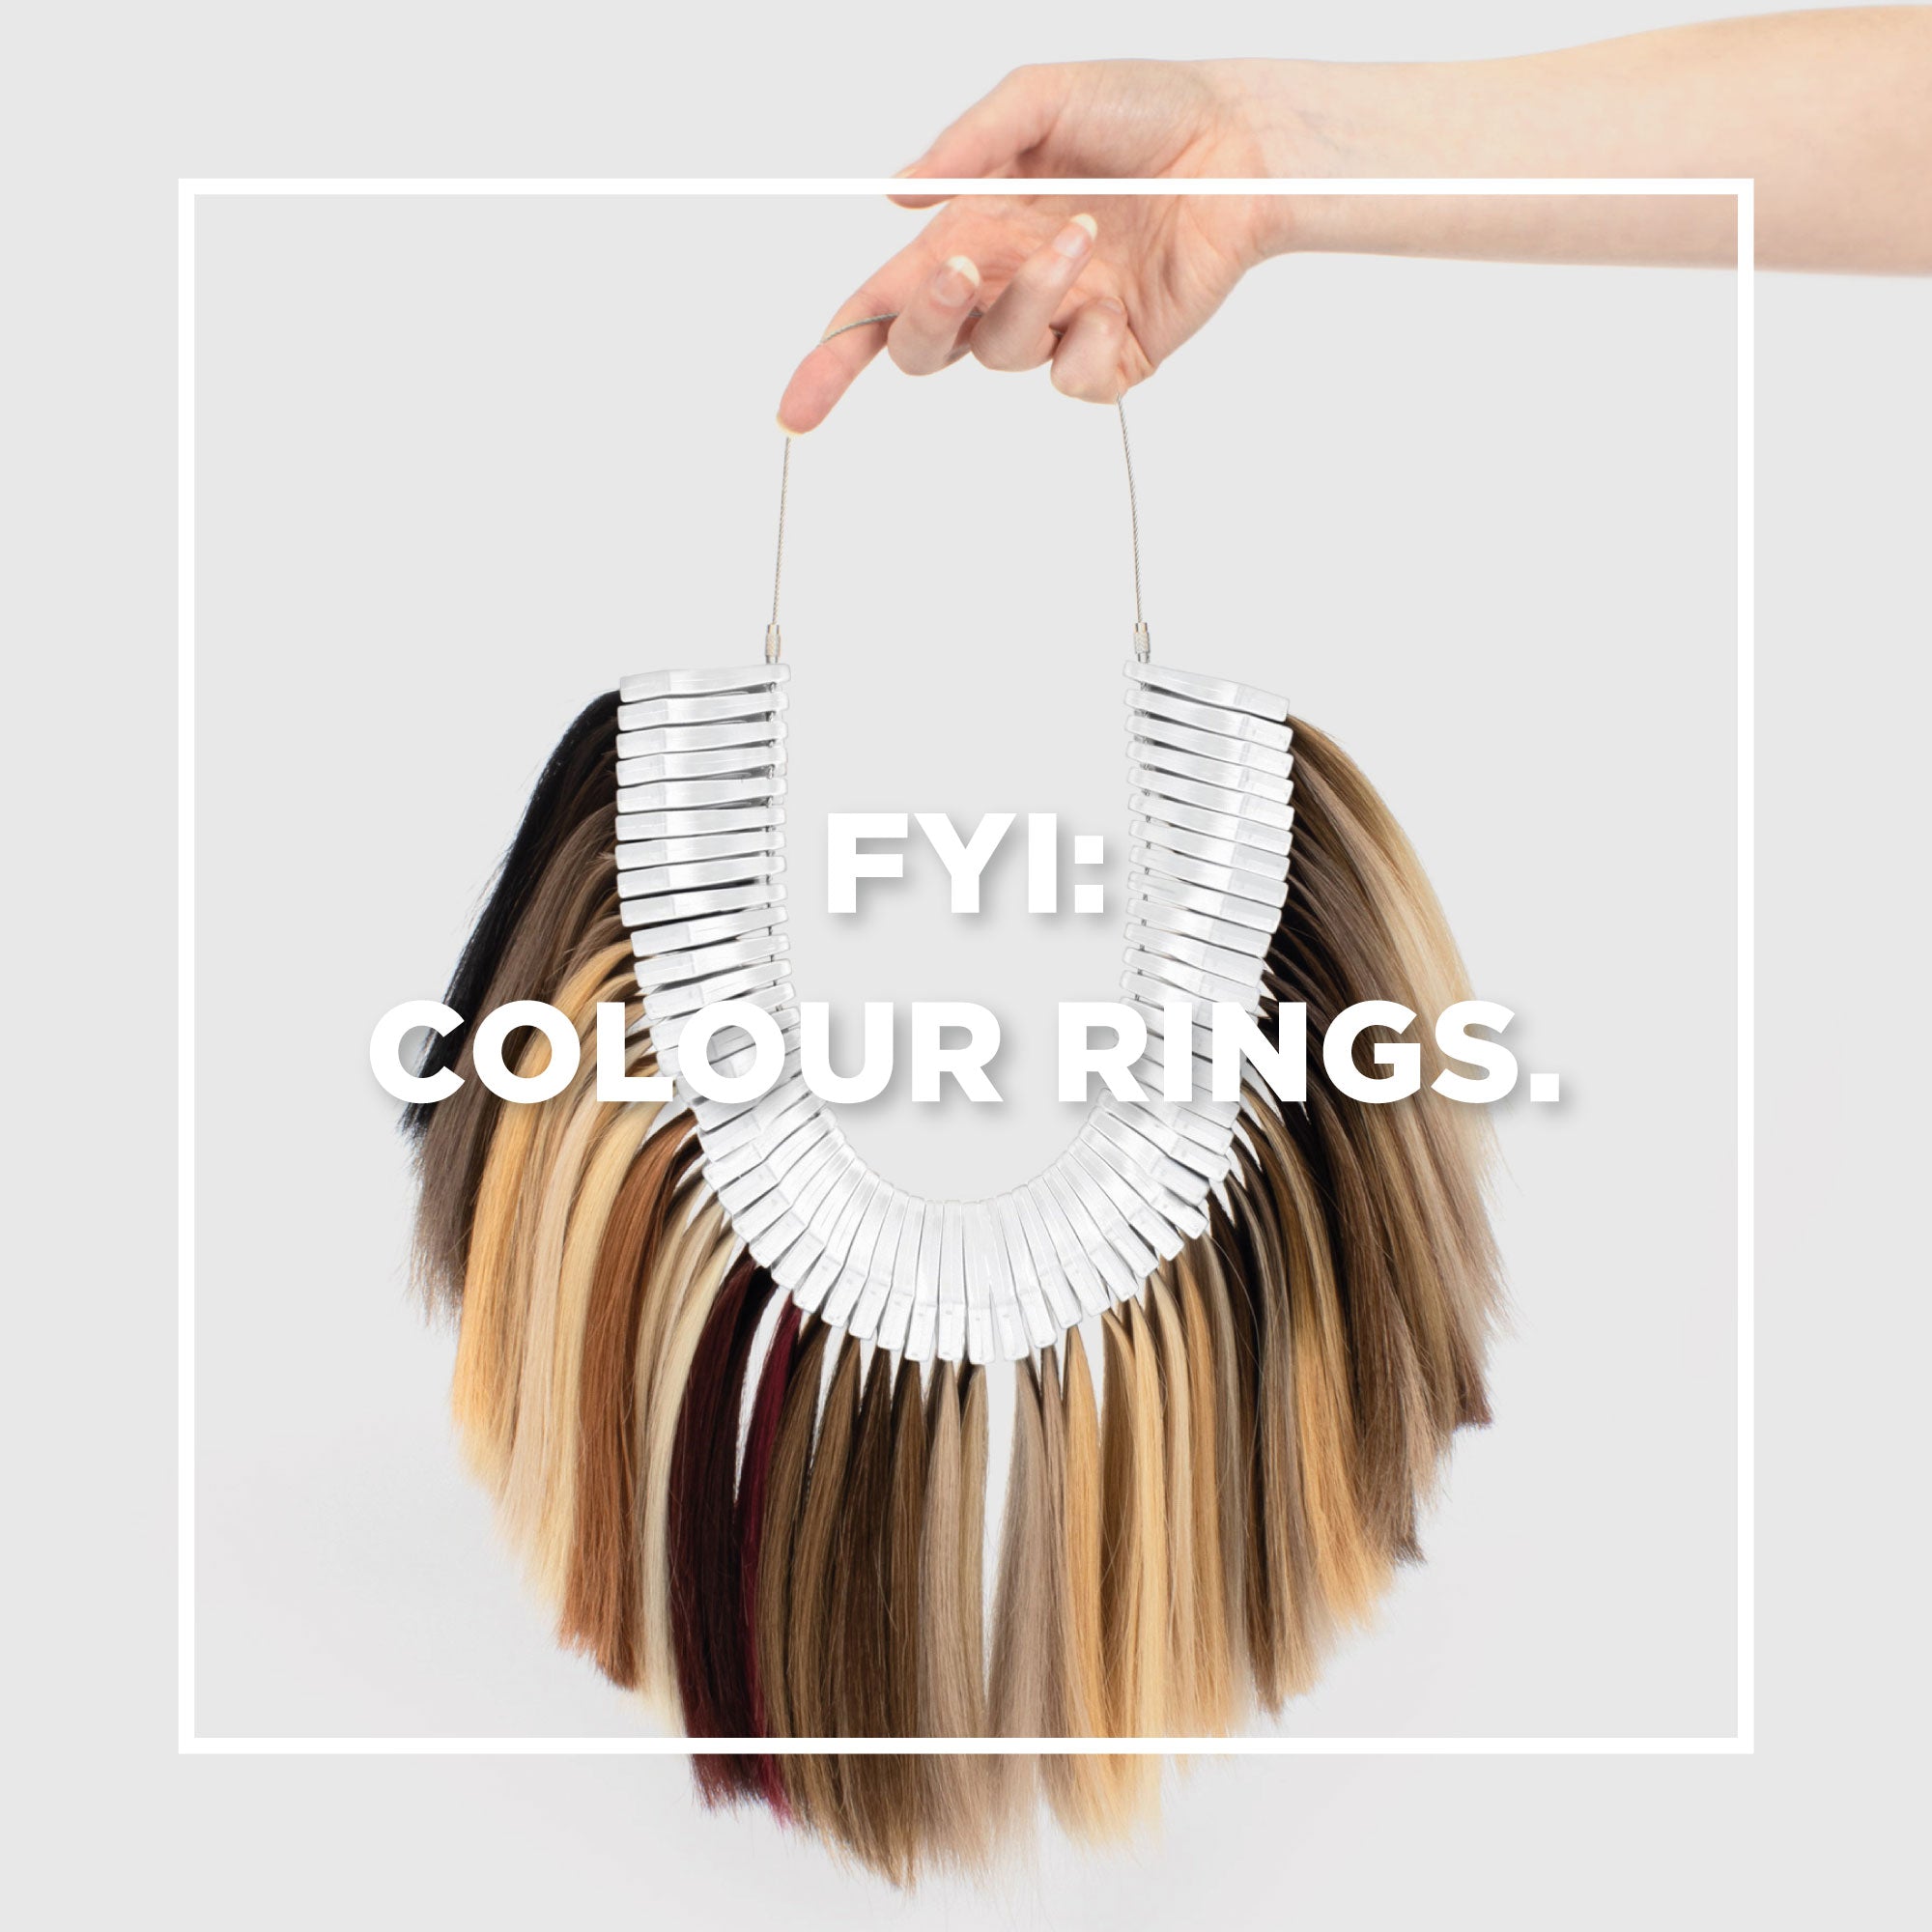 All you need to know about our Colour Rings